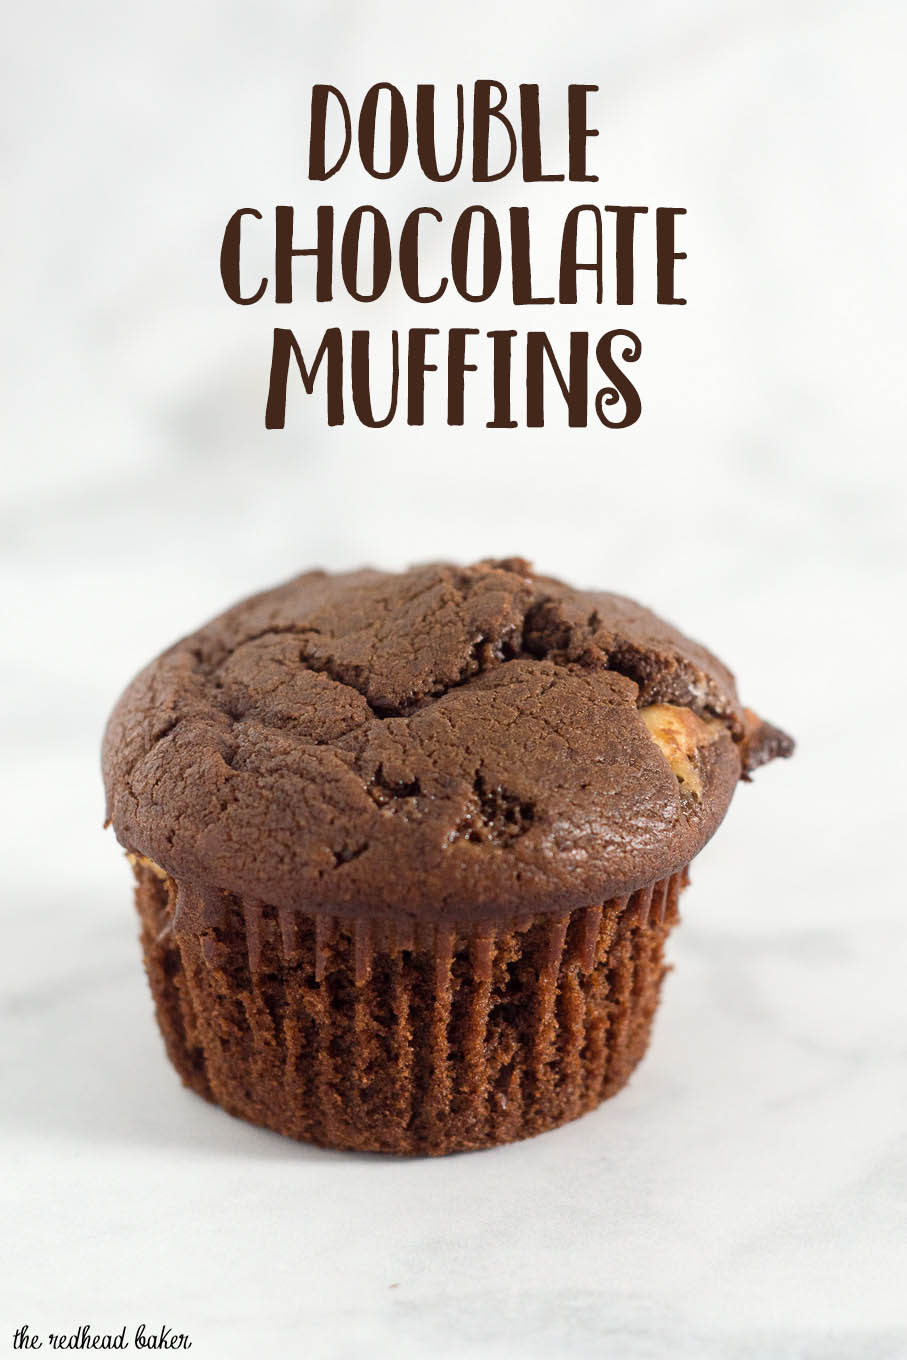 Double chocolate muffins pack a double punch -- rich semisweet chocolate in the muffin batter, and white chocolate chips mixed in. Are they for breakfast or dessert? You decide! #Choctoberfest